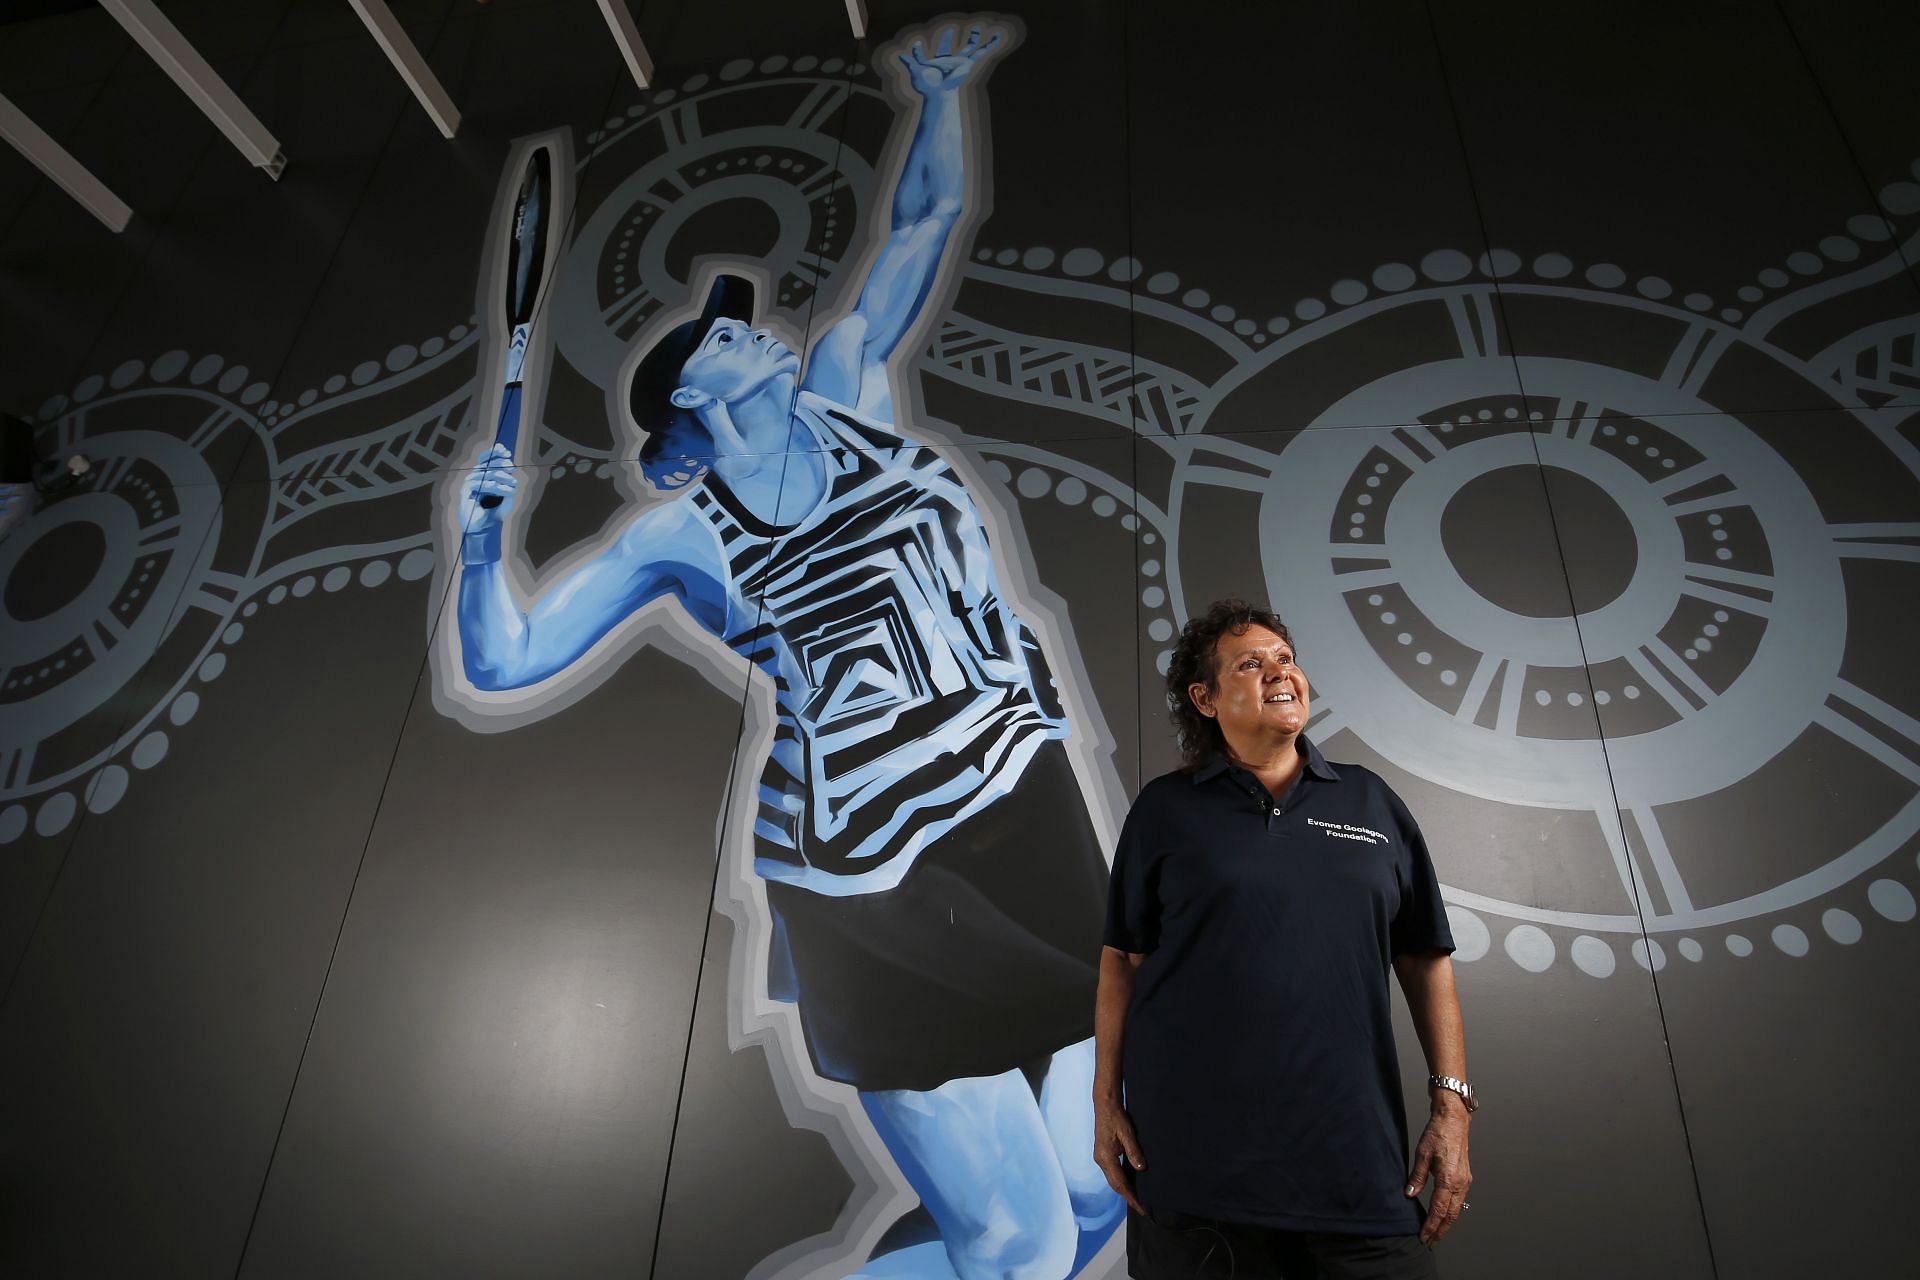 Evonne Goolagong Cawley in front of her mural at the National Indigenous Tennis Carnival in Australia